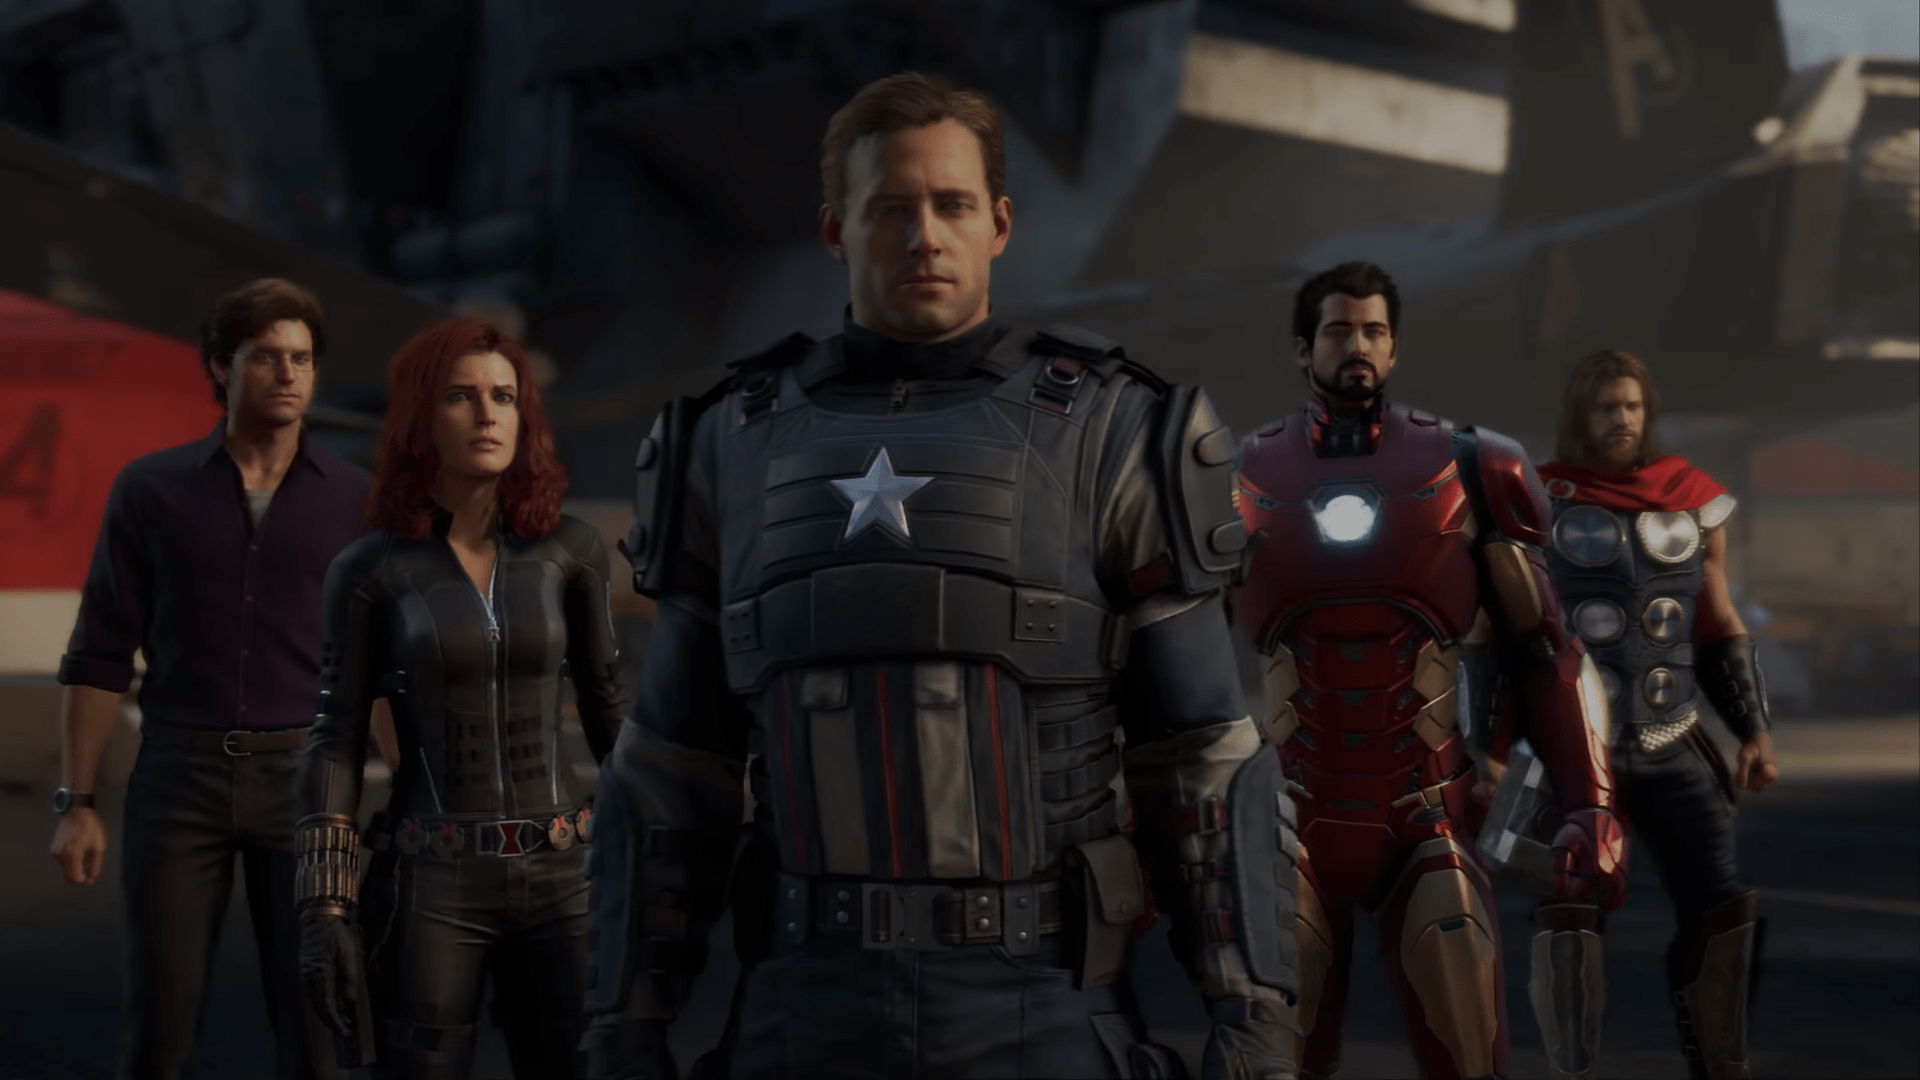 Crystal Dynamics’ Upcoming Avengers Game Is Shaping Up To Be Their Biggest Adventure Yet